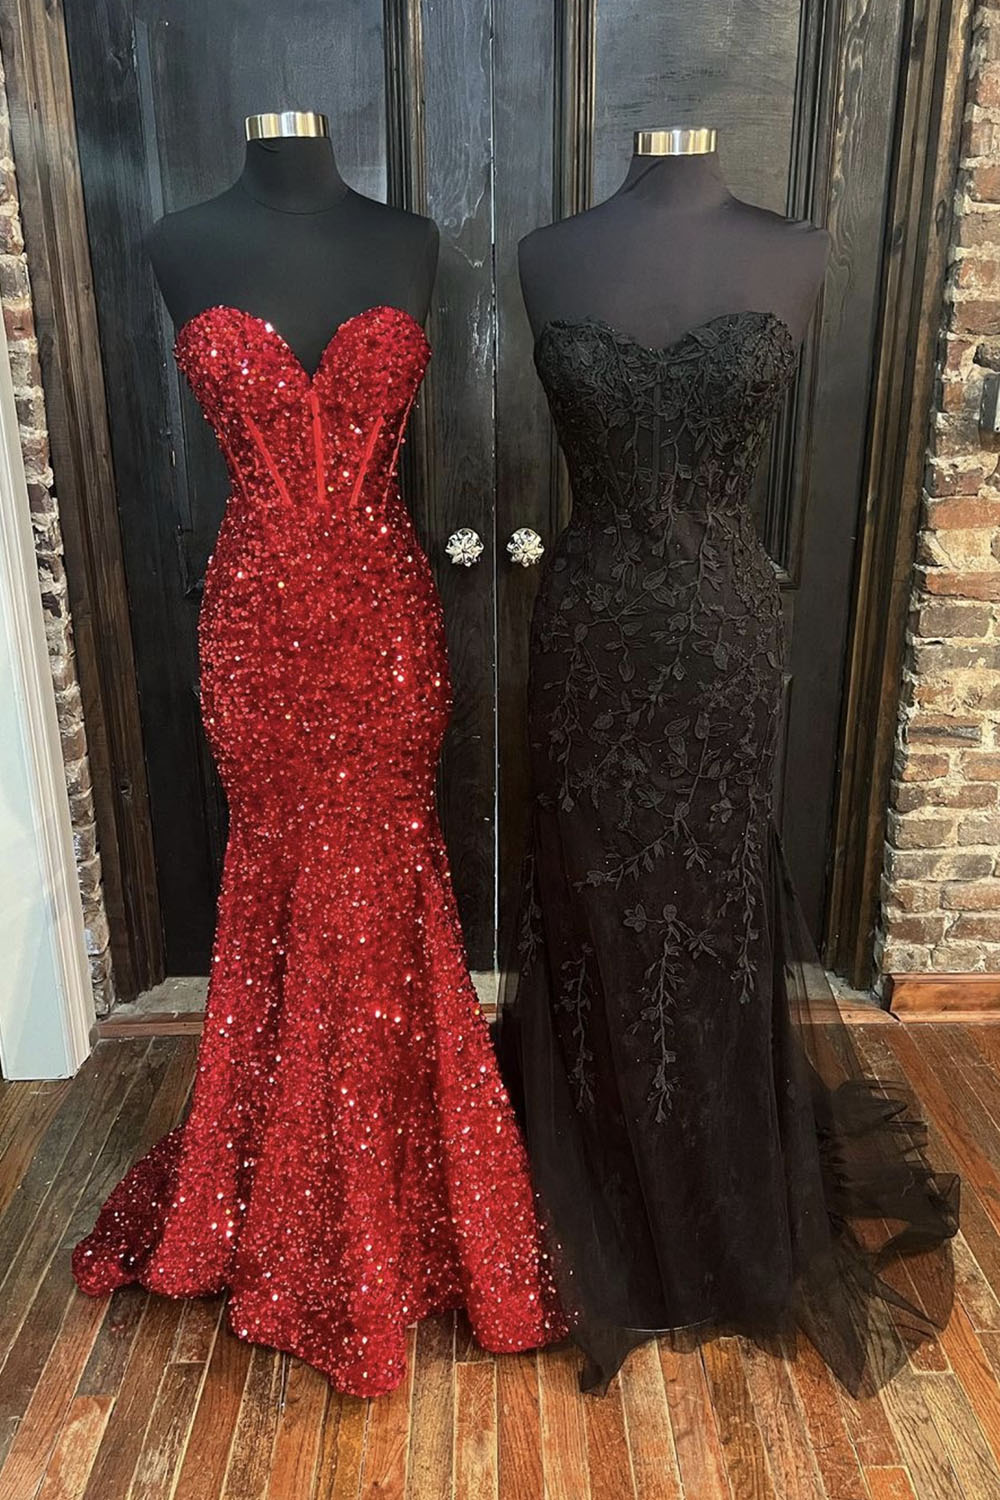 Mermaid Strapless Long Prom Dresses, Red Sequins Evening Dresses, Black Lace Party Dresses